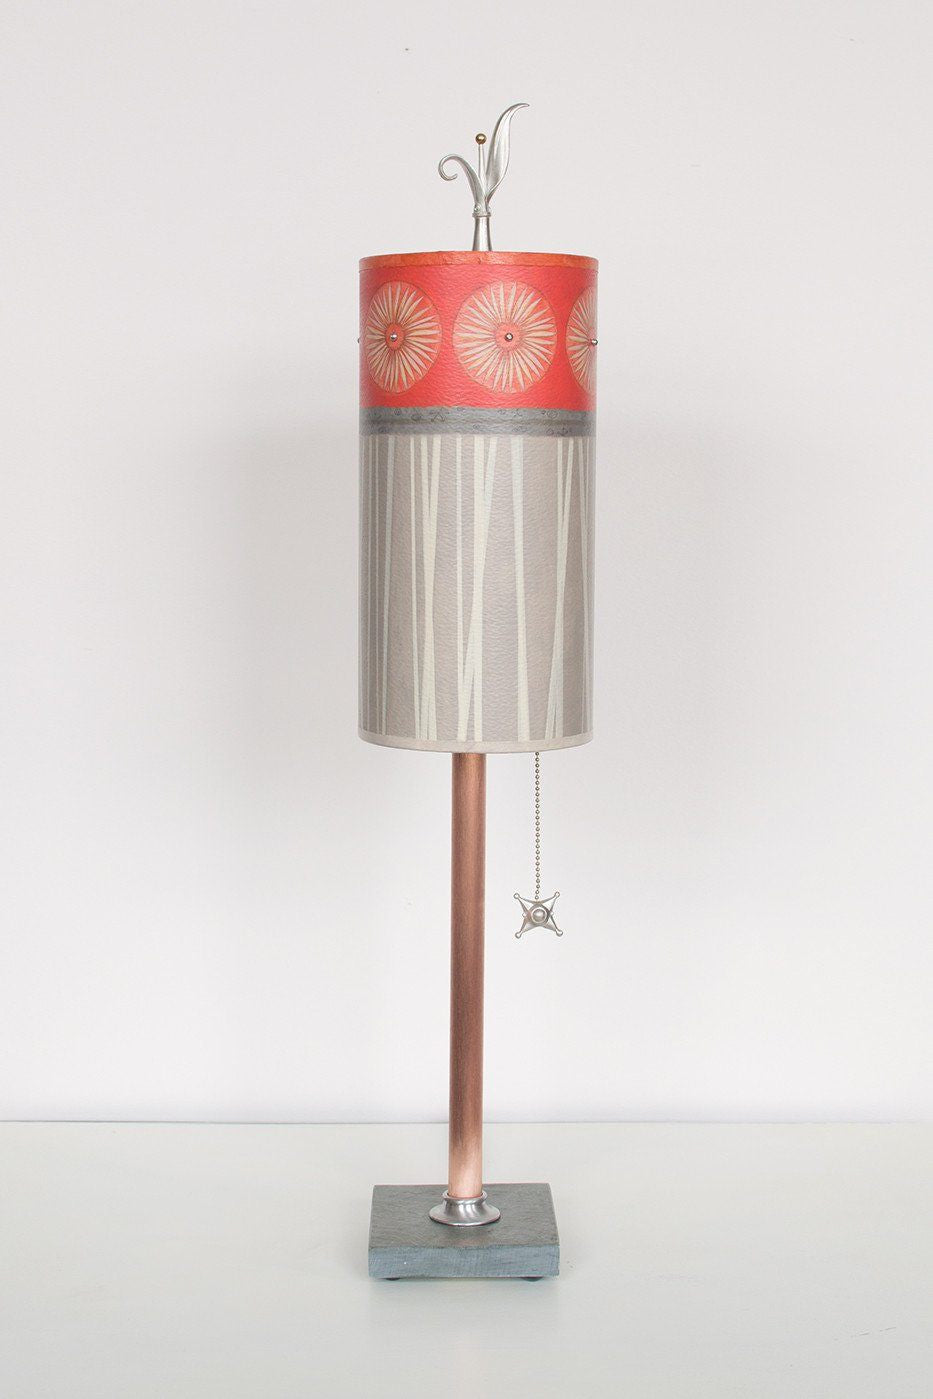 Janna Ugone &amp; Co Table Lamps Copper Table Lamp with Small Tube Shade in Tang